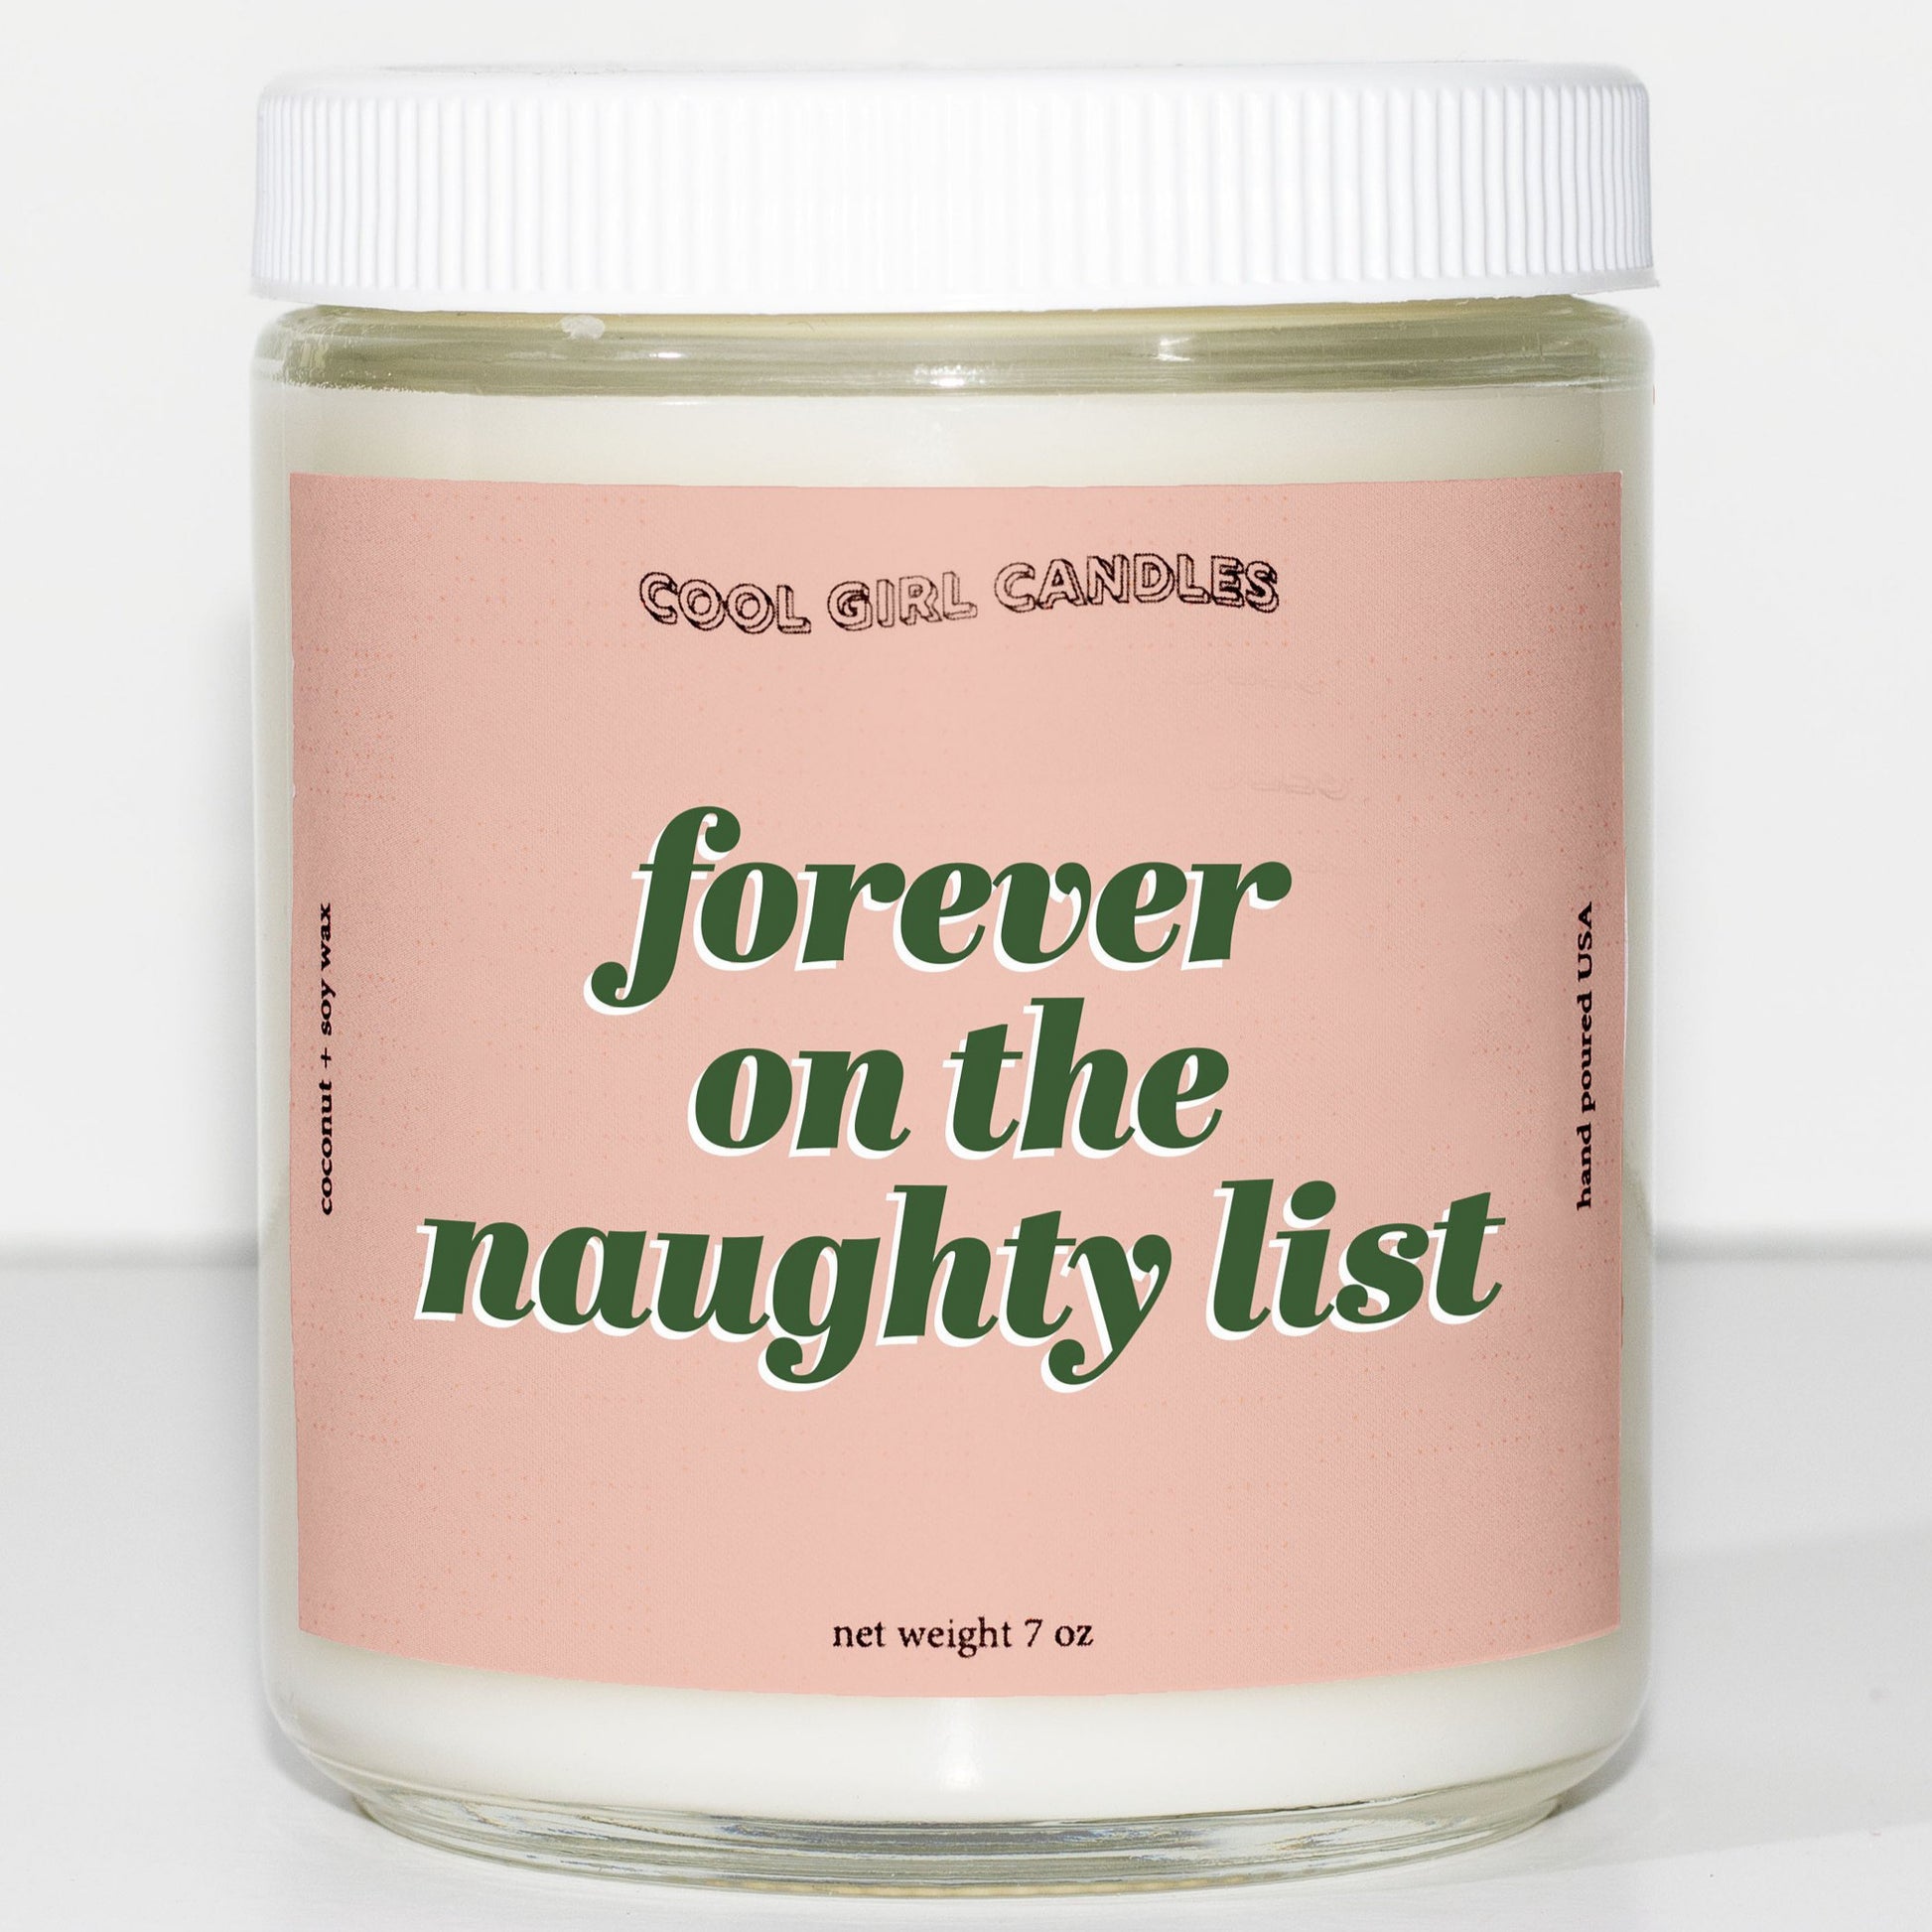 foreveer on the naughty list candle cute christmas candle funny christmas candle